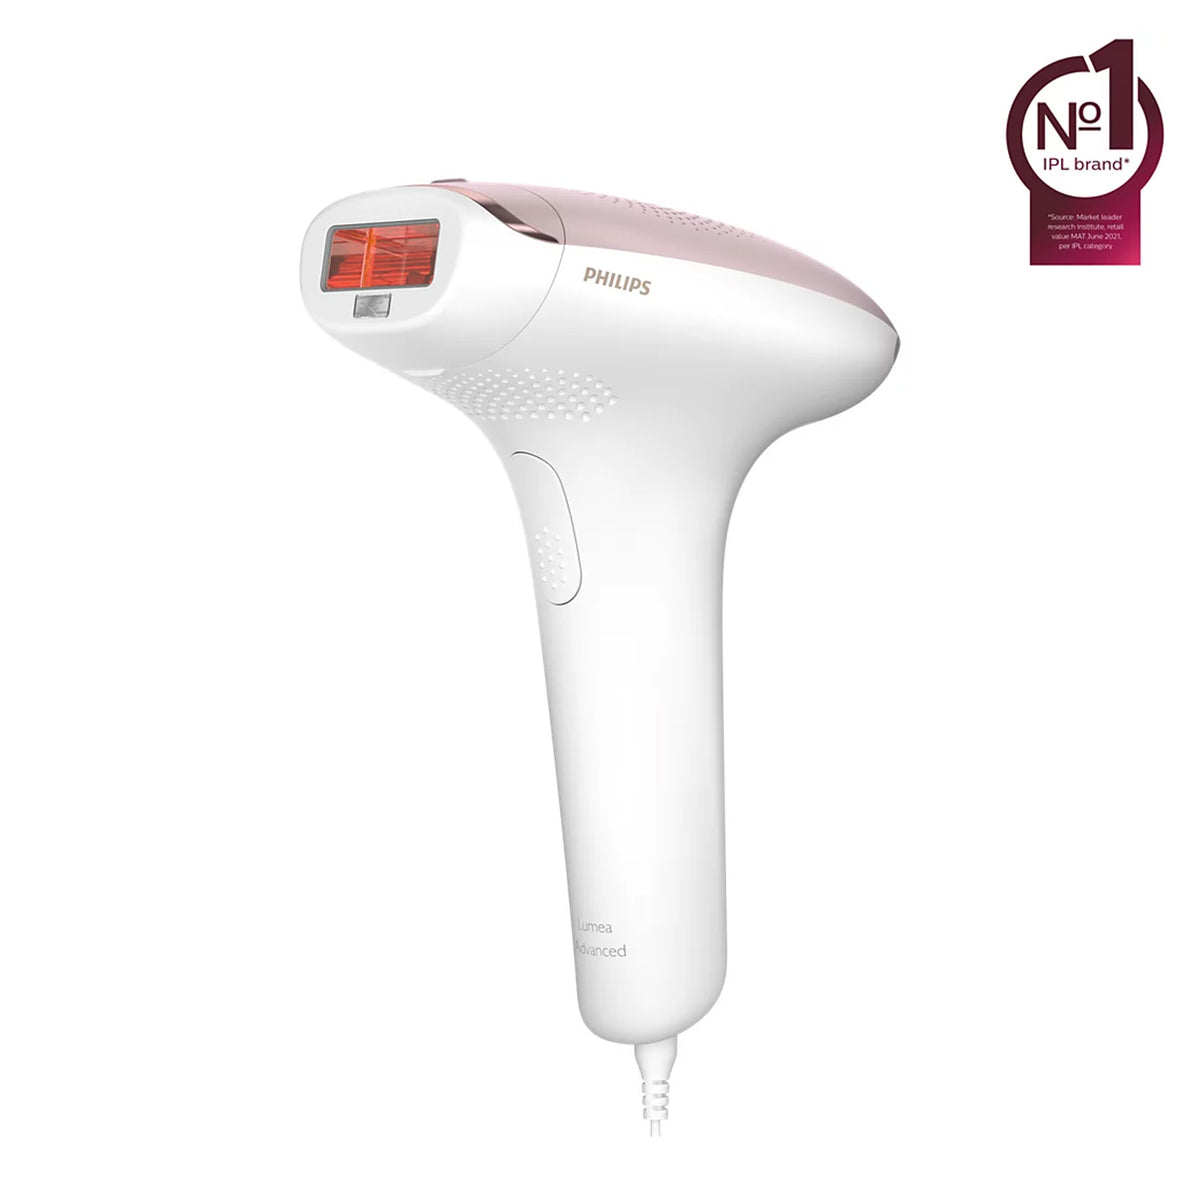 Philips SC1994/80 Lumea Series 7000 IPL Hair Removal Device